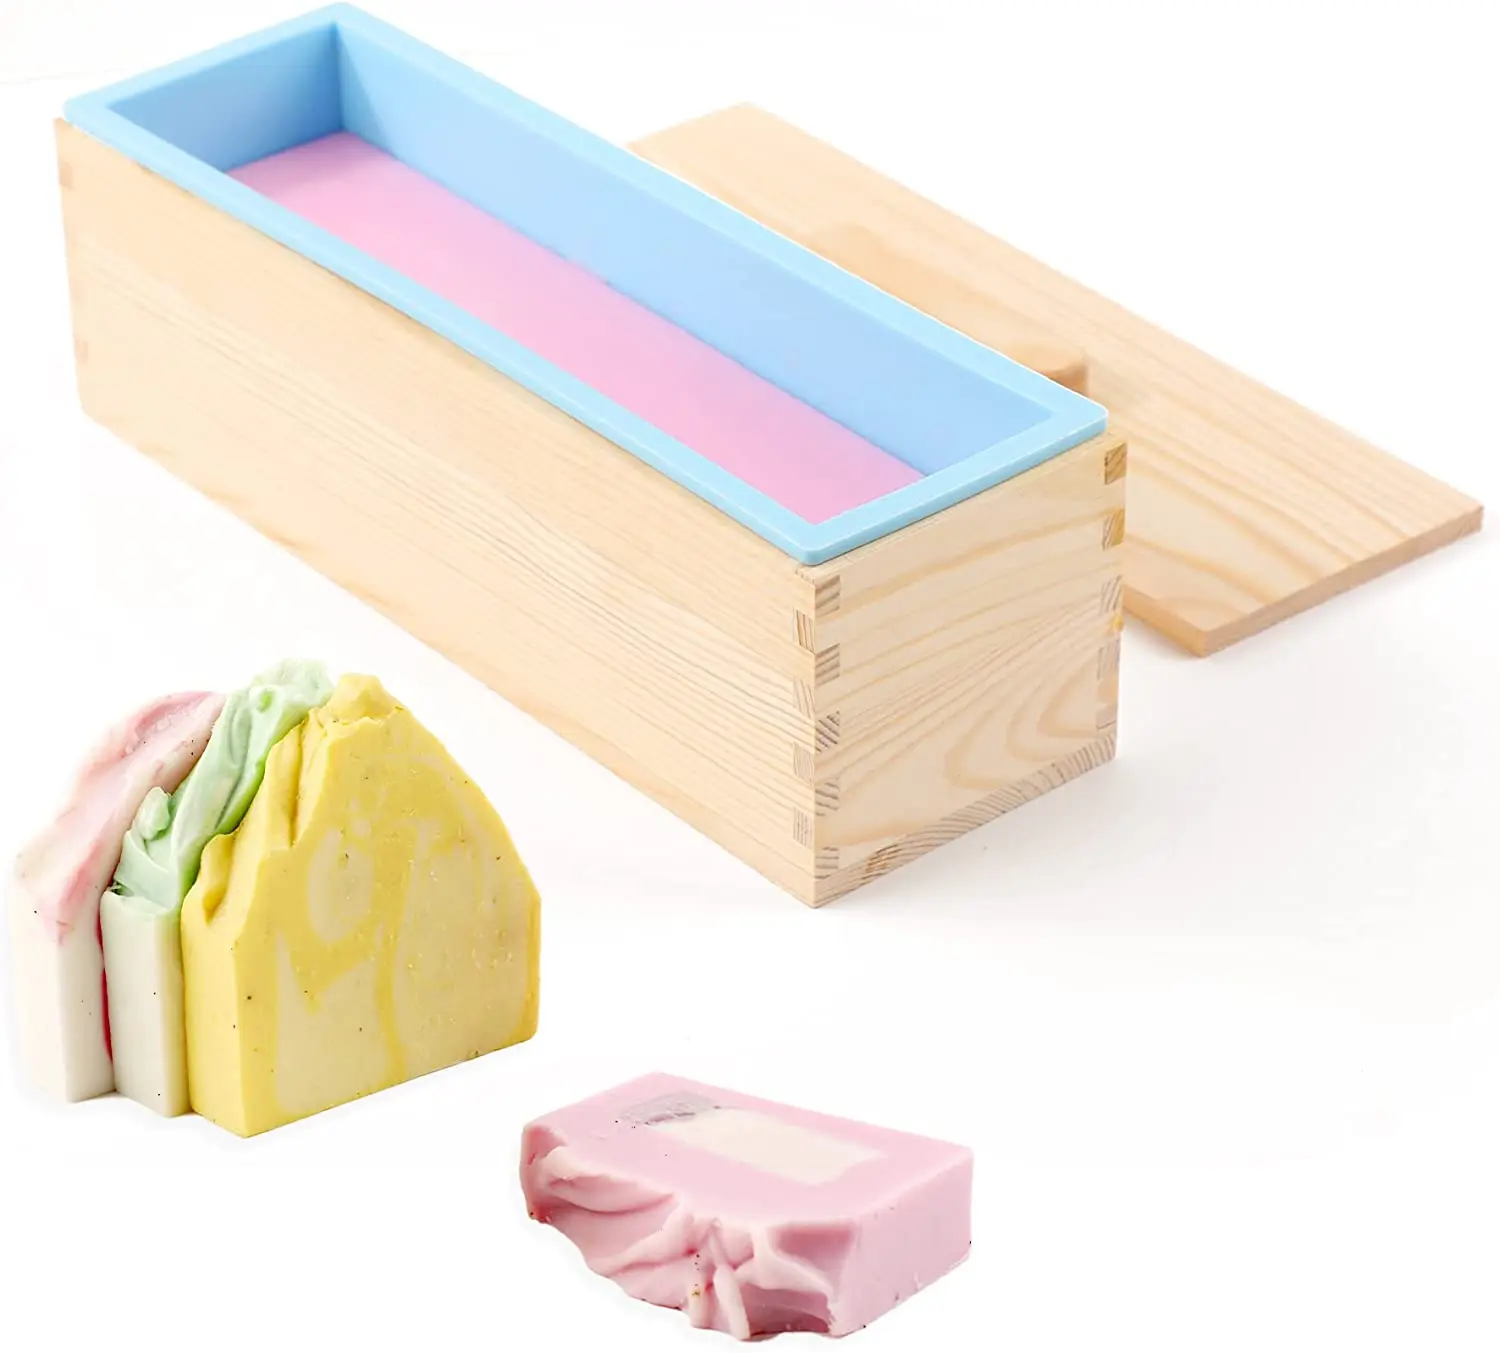 Wooden Soap Molds & Silicone Liners